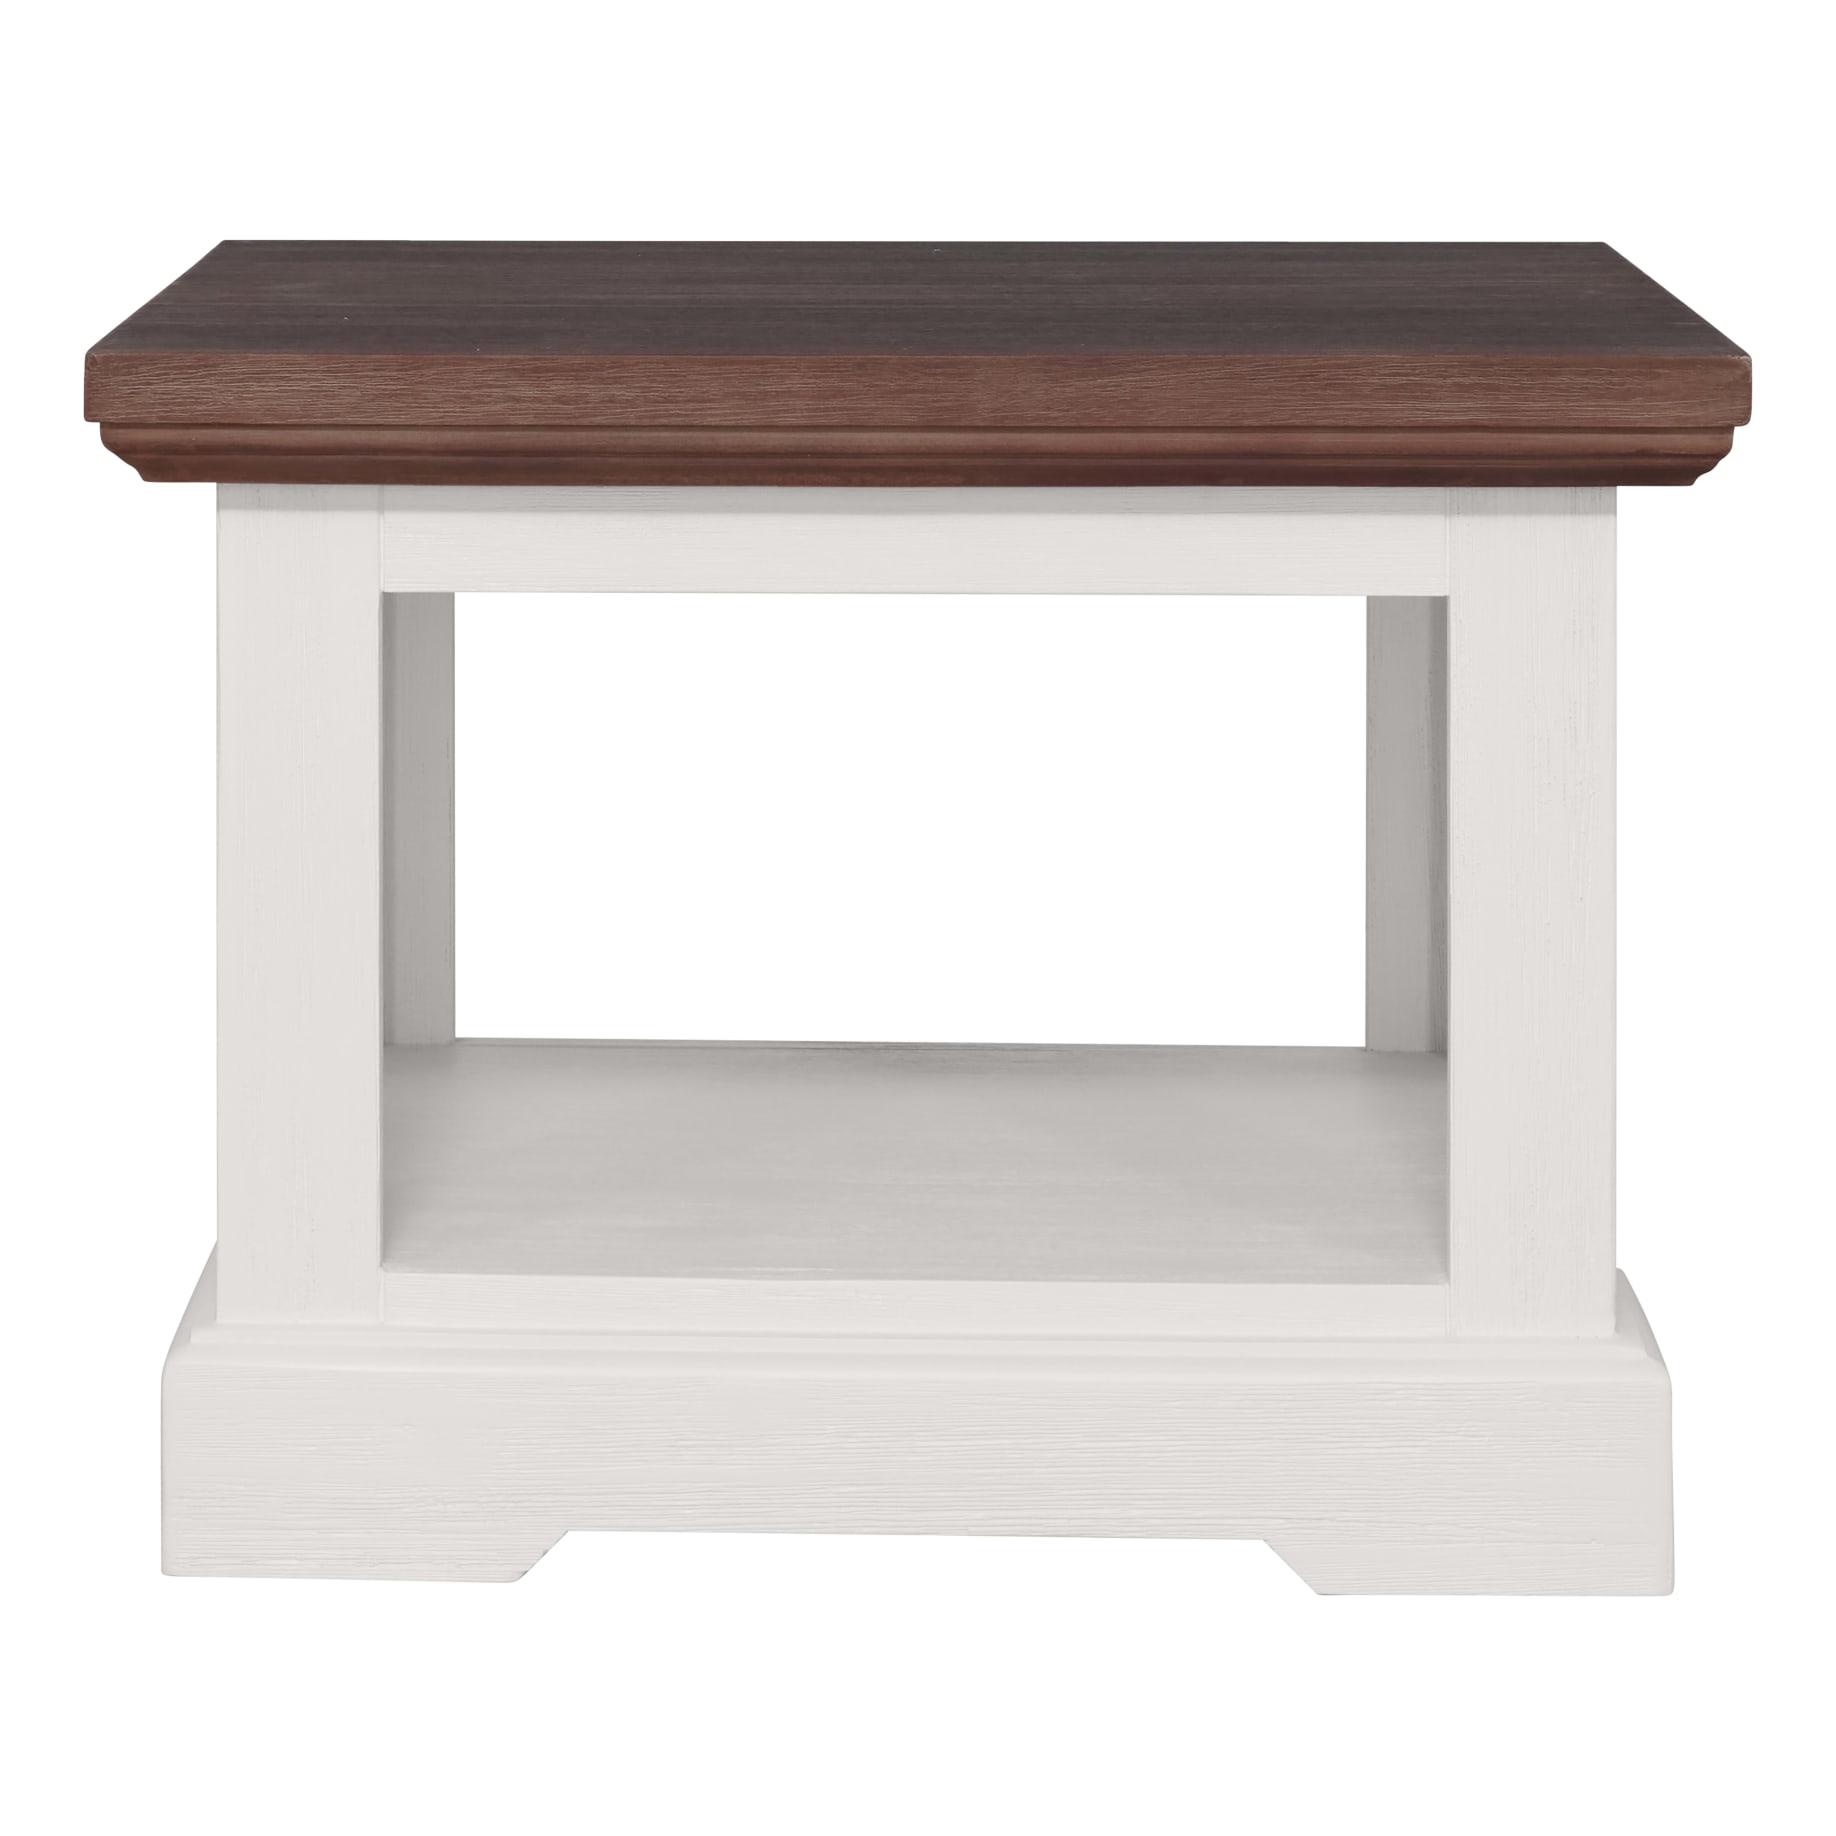 Hamptons Side Table 60cm in Acacia Two Tone